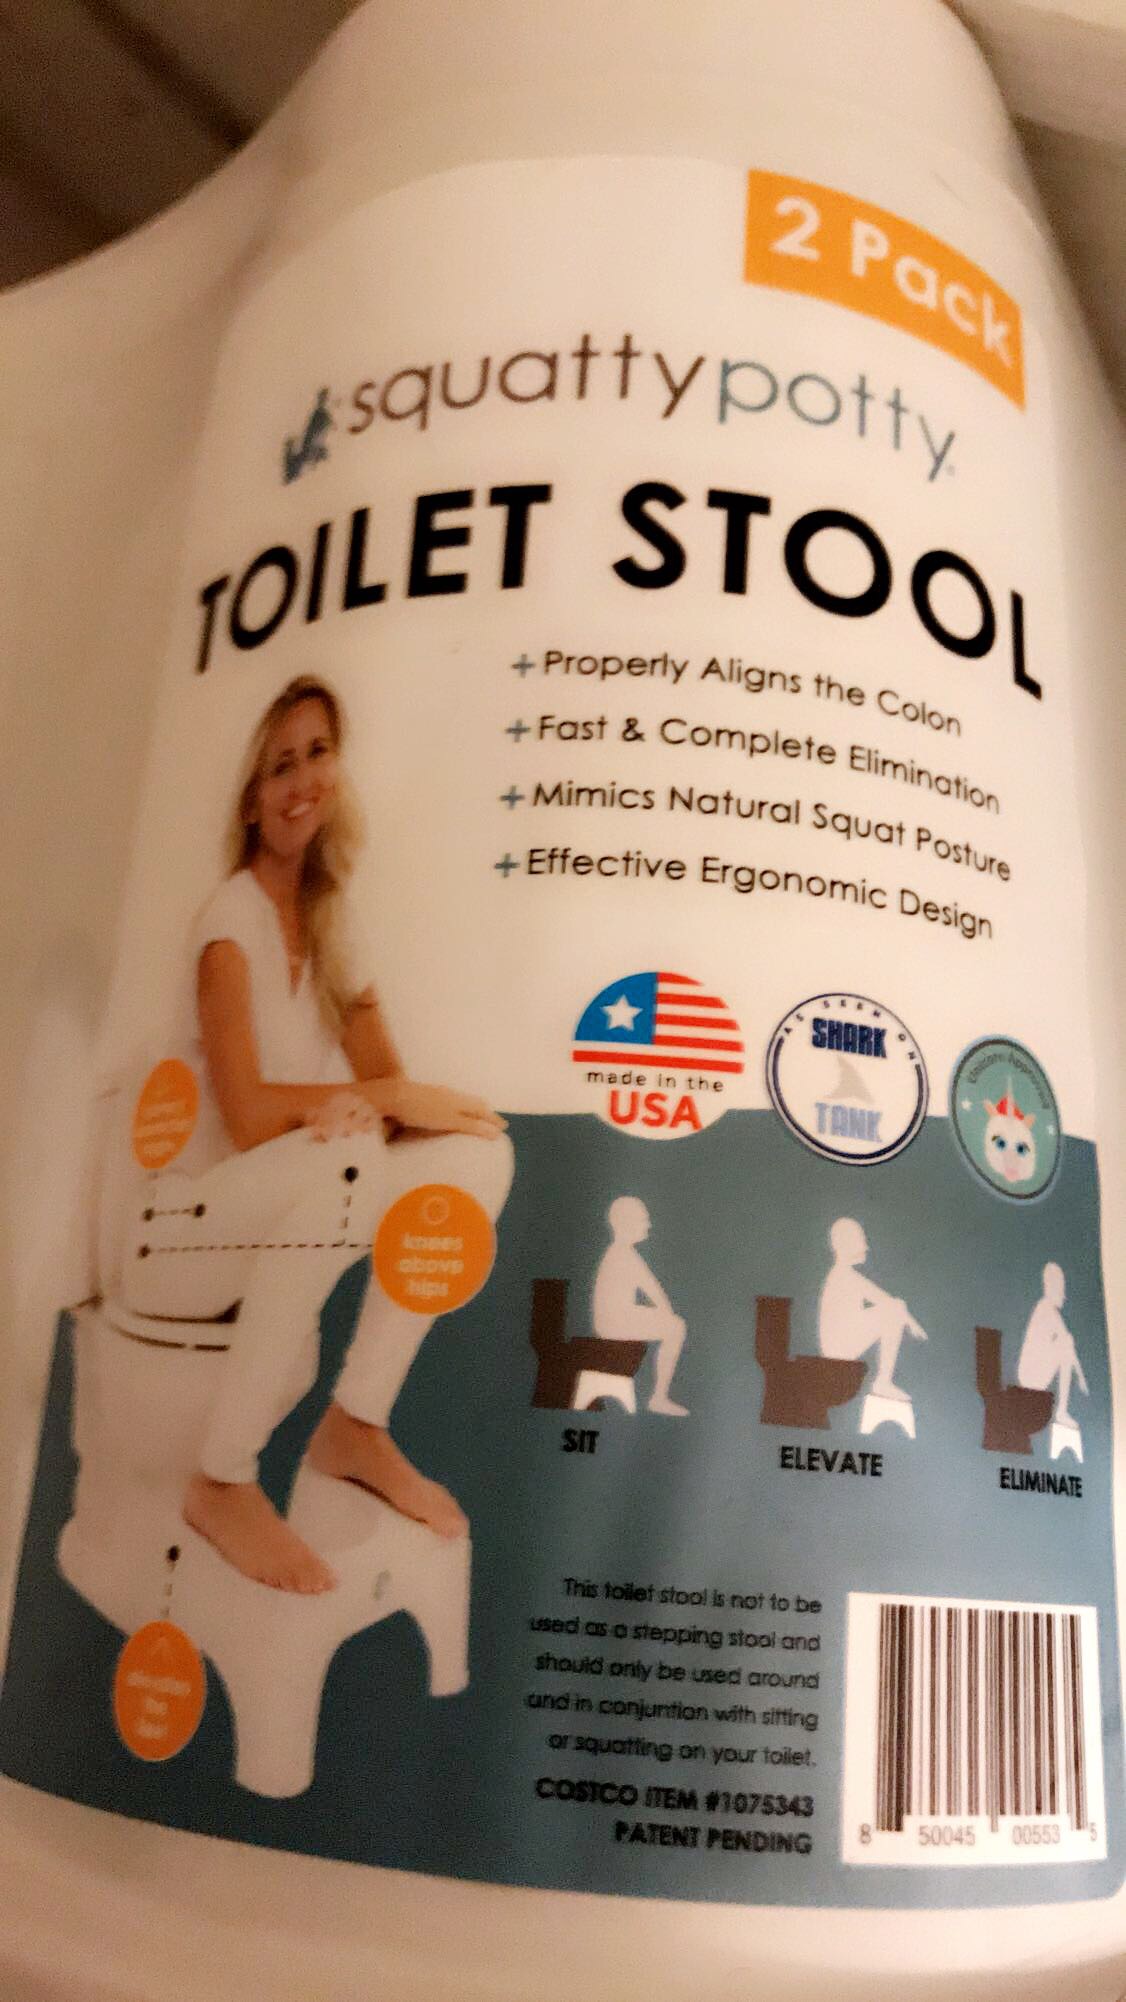 The Squatty Potty - toilet stool that helps you poop better.